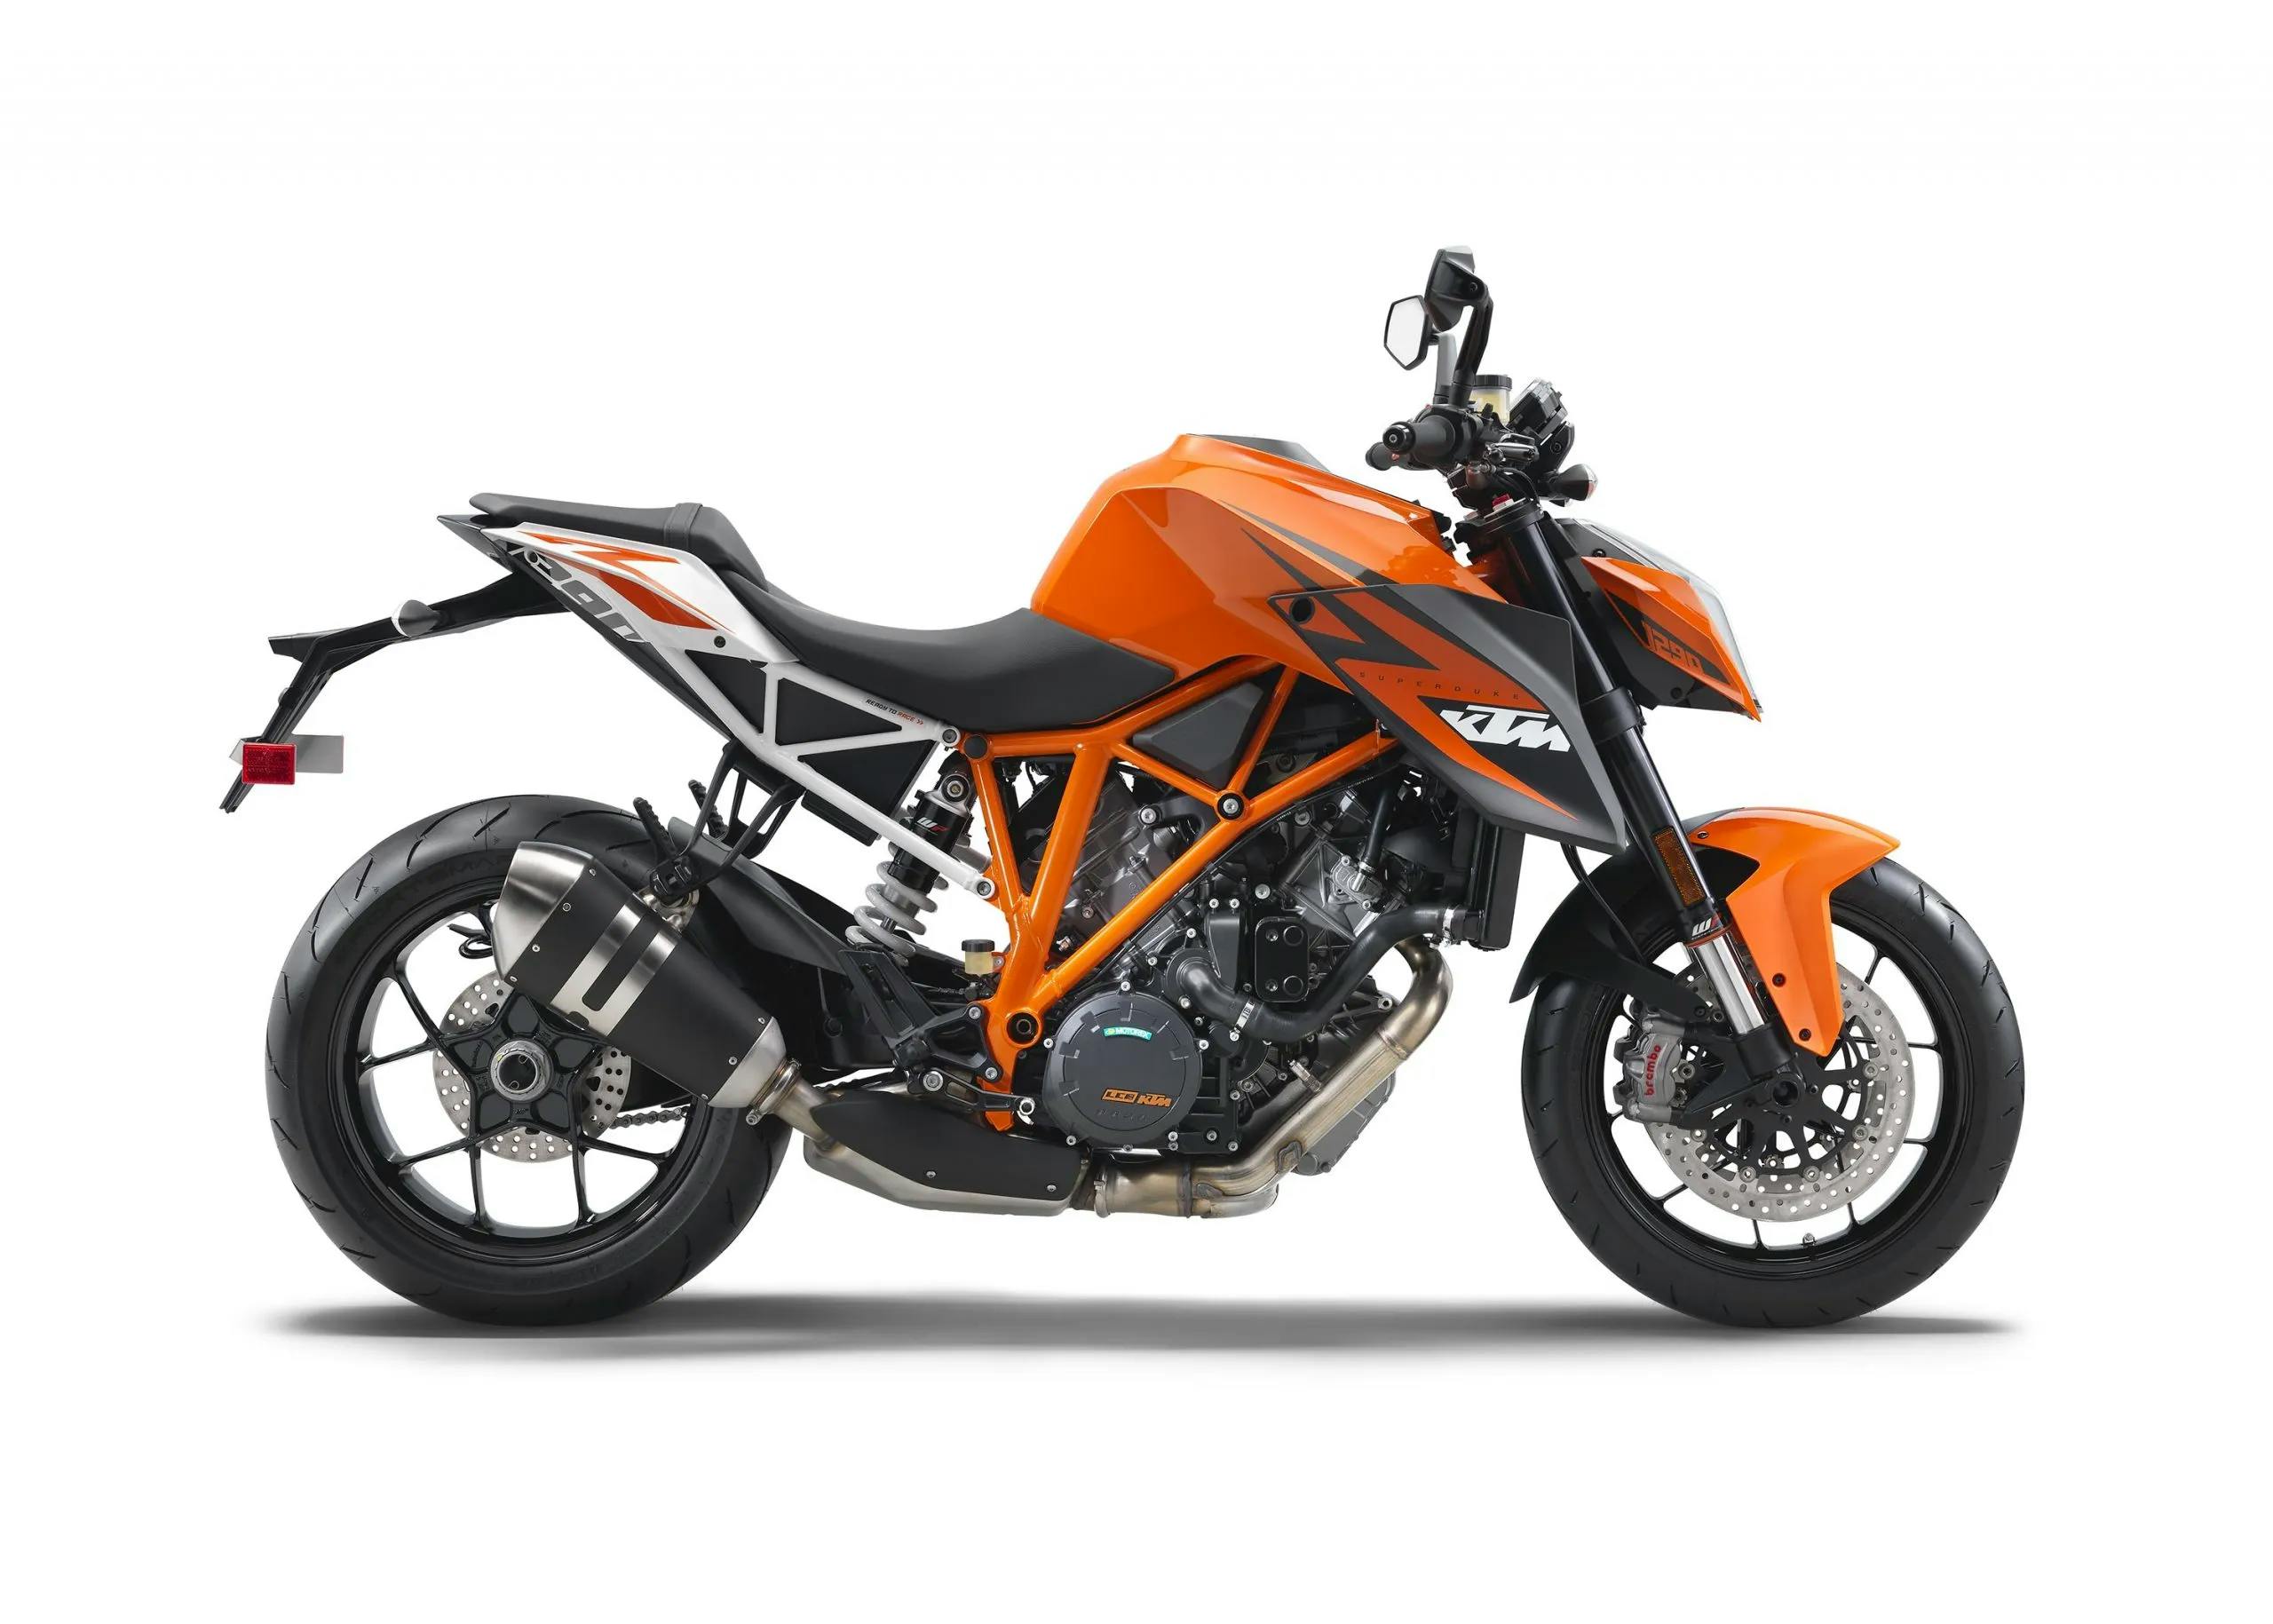 KTM 1290 super duke r (SDR) great motorcycle for tall riders